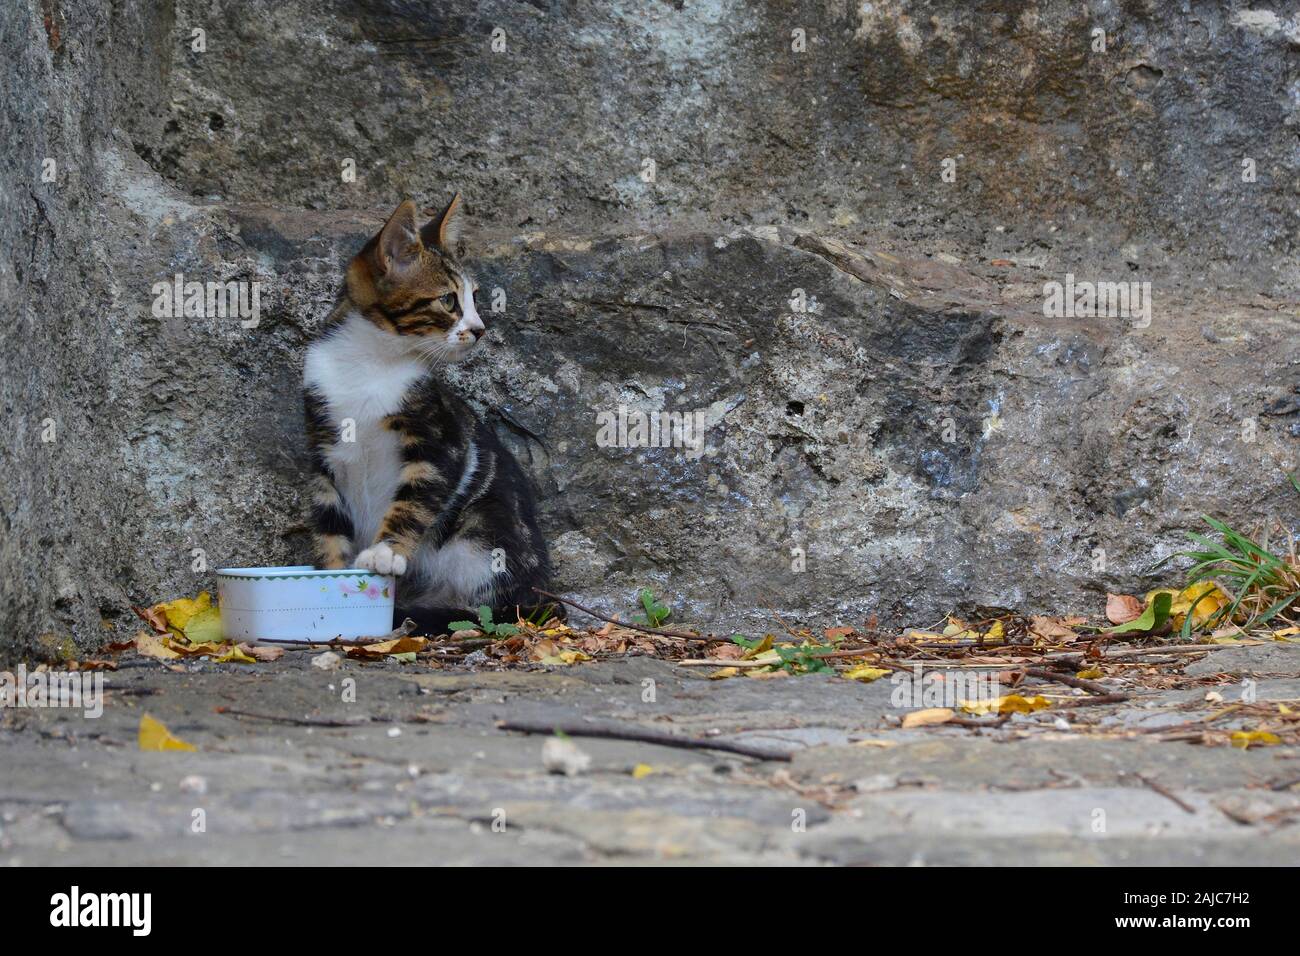 A feral kitten in the grounds of the 15th century Rumeli Hisari fort in the Sariyer district of Istanbul, Turkey Stock Photo